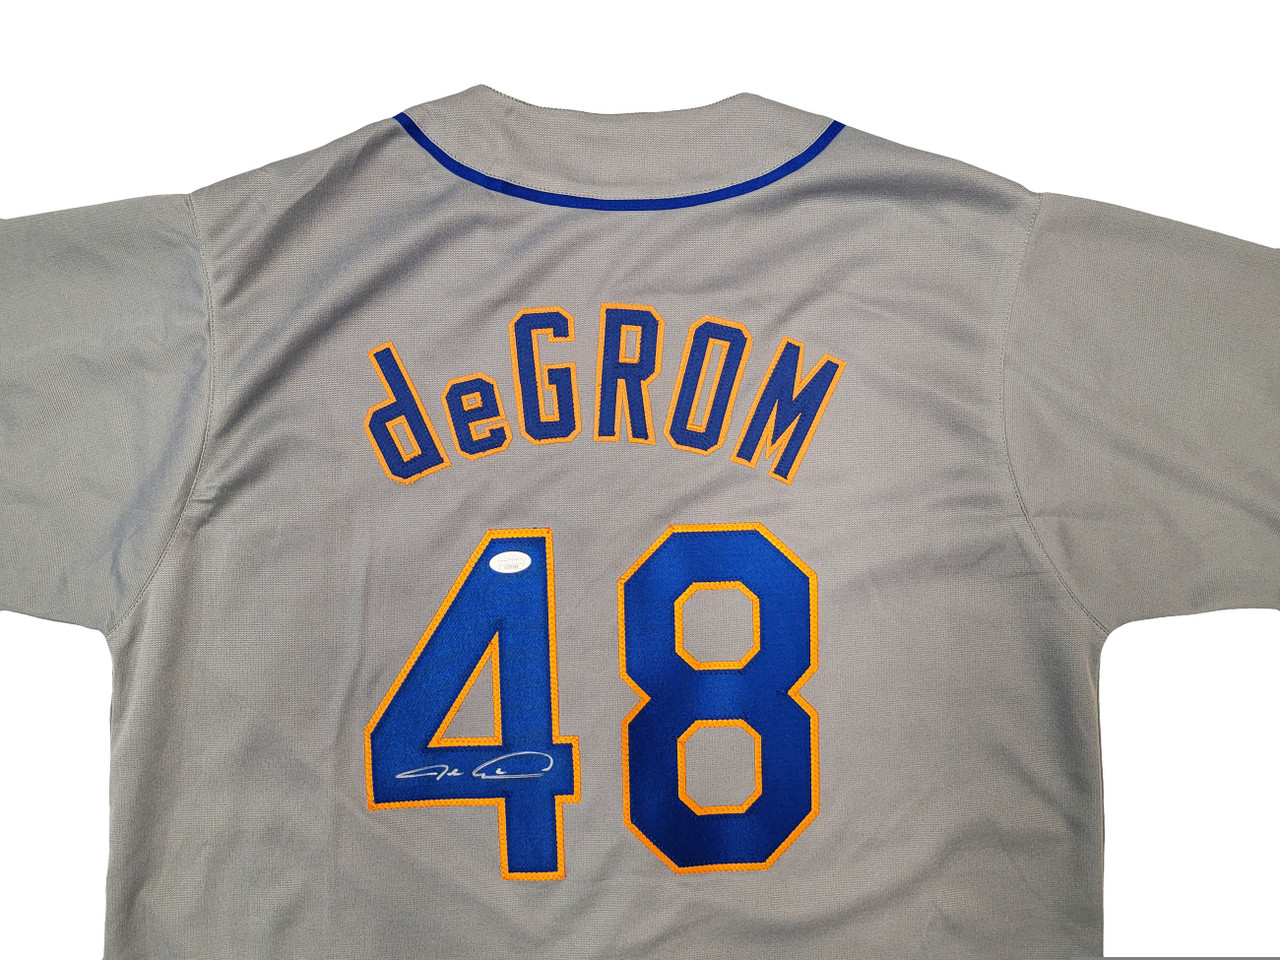 New York Mets Jacob deGrom Autographed Gray Jersey JSA Stock